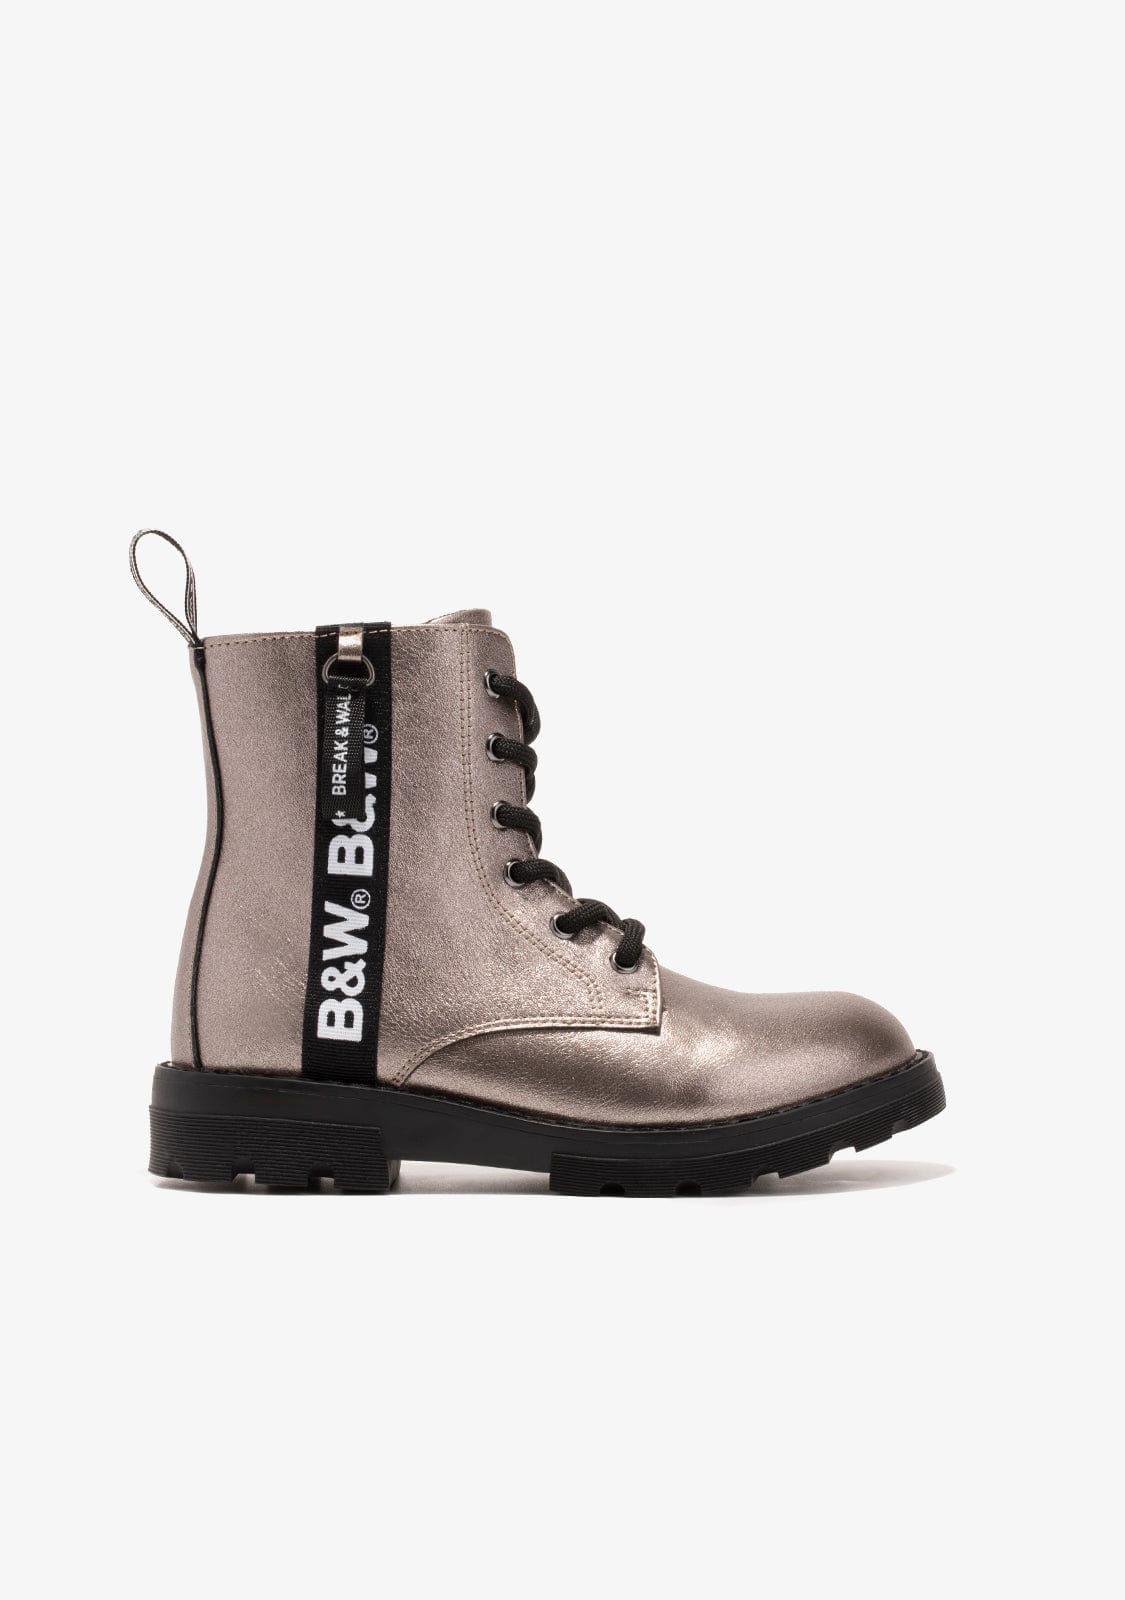 Lead Military Logo Boots